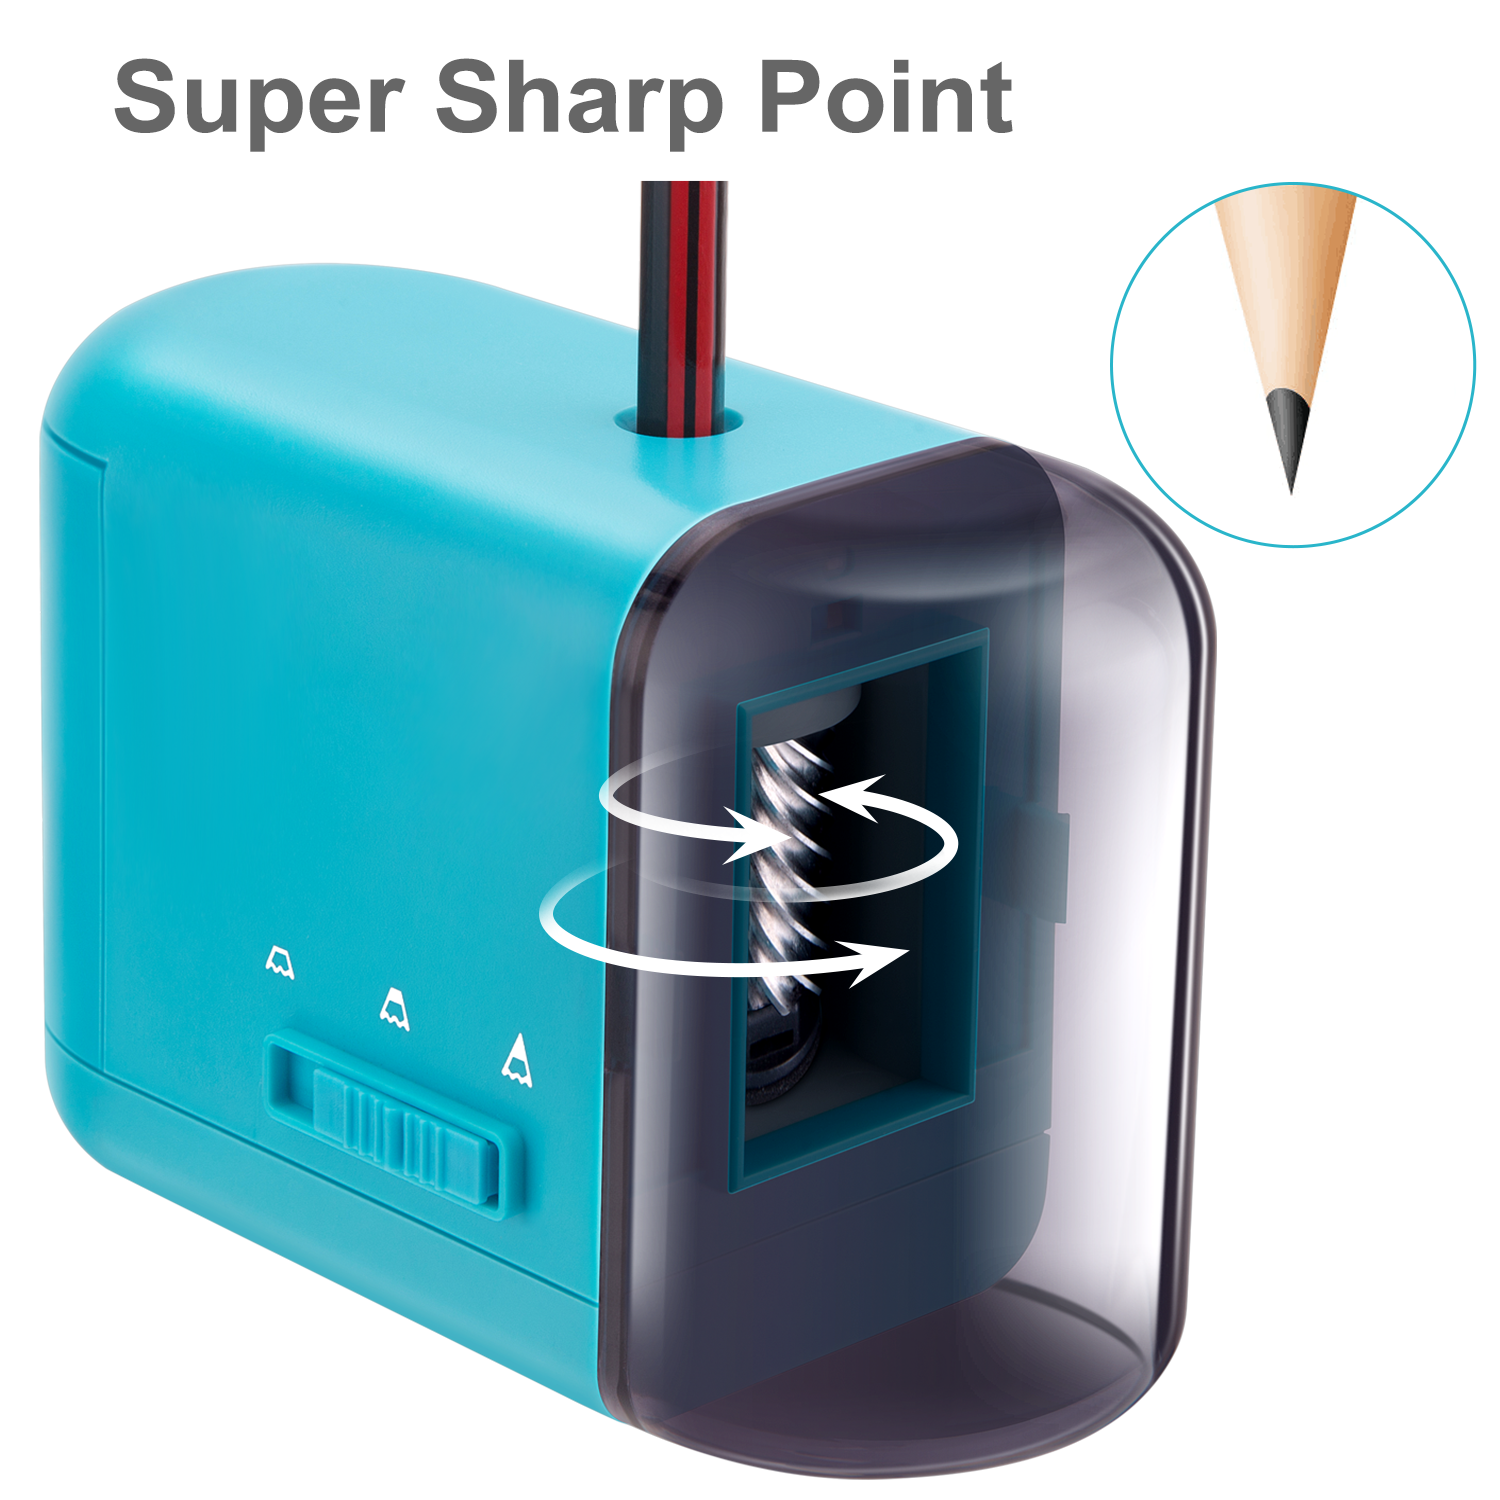 Electric Pencil Sharpener for Colored Pencils (6-8mm) with Adapter Bla –  AFMAT